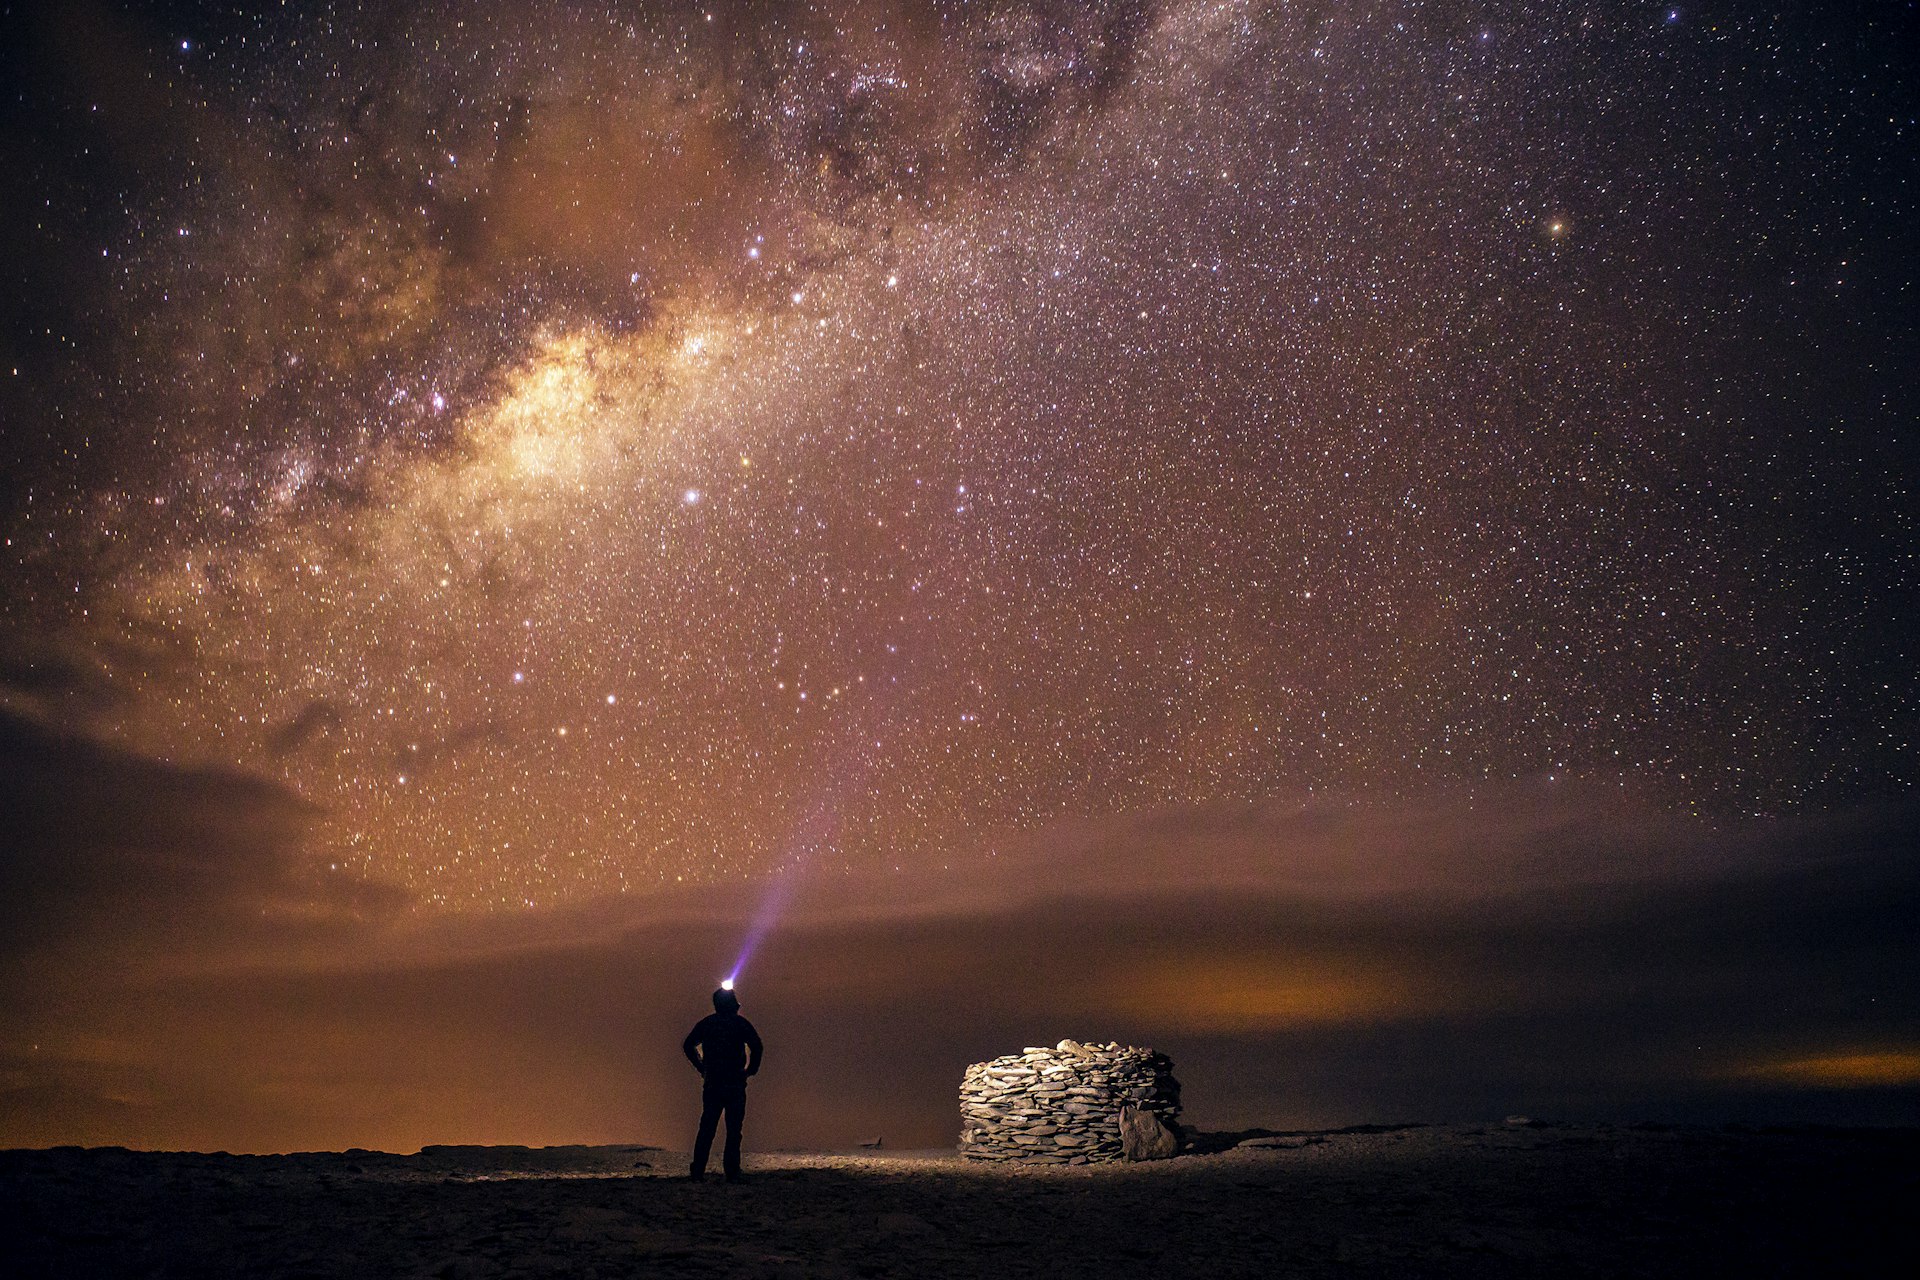 A person stands in the dark next to a stone structure wearing a headlamp; the skies above reveal the Milky Way. Atacama Desert, Chile, South America. 